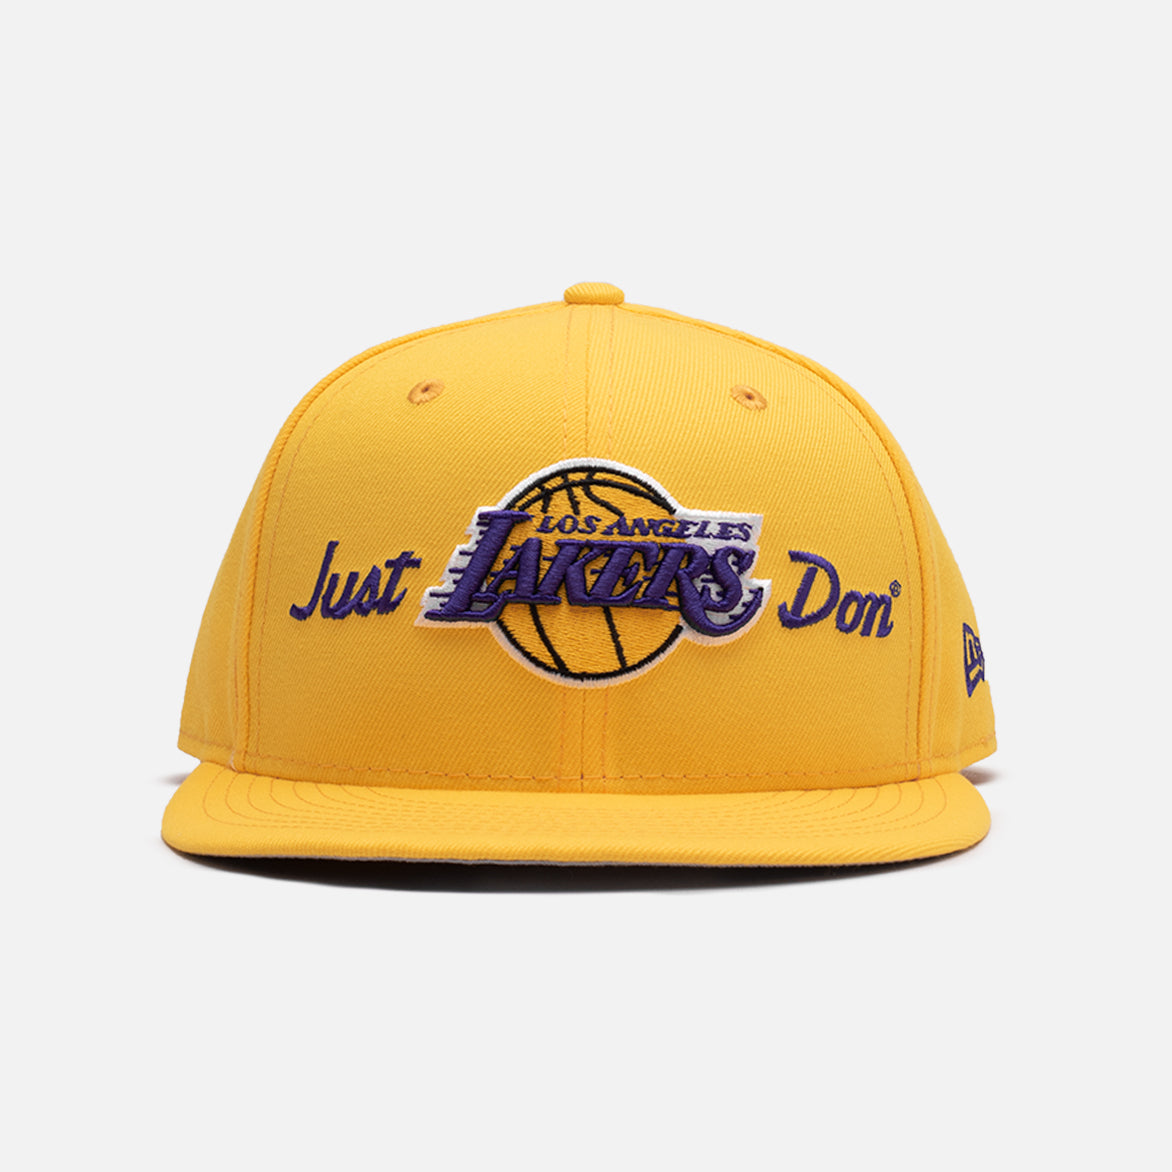 JUST DON X NEW ERA NBA 59FIFTY FITTED LAKERS - YELLOW